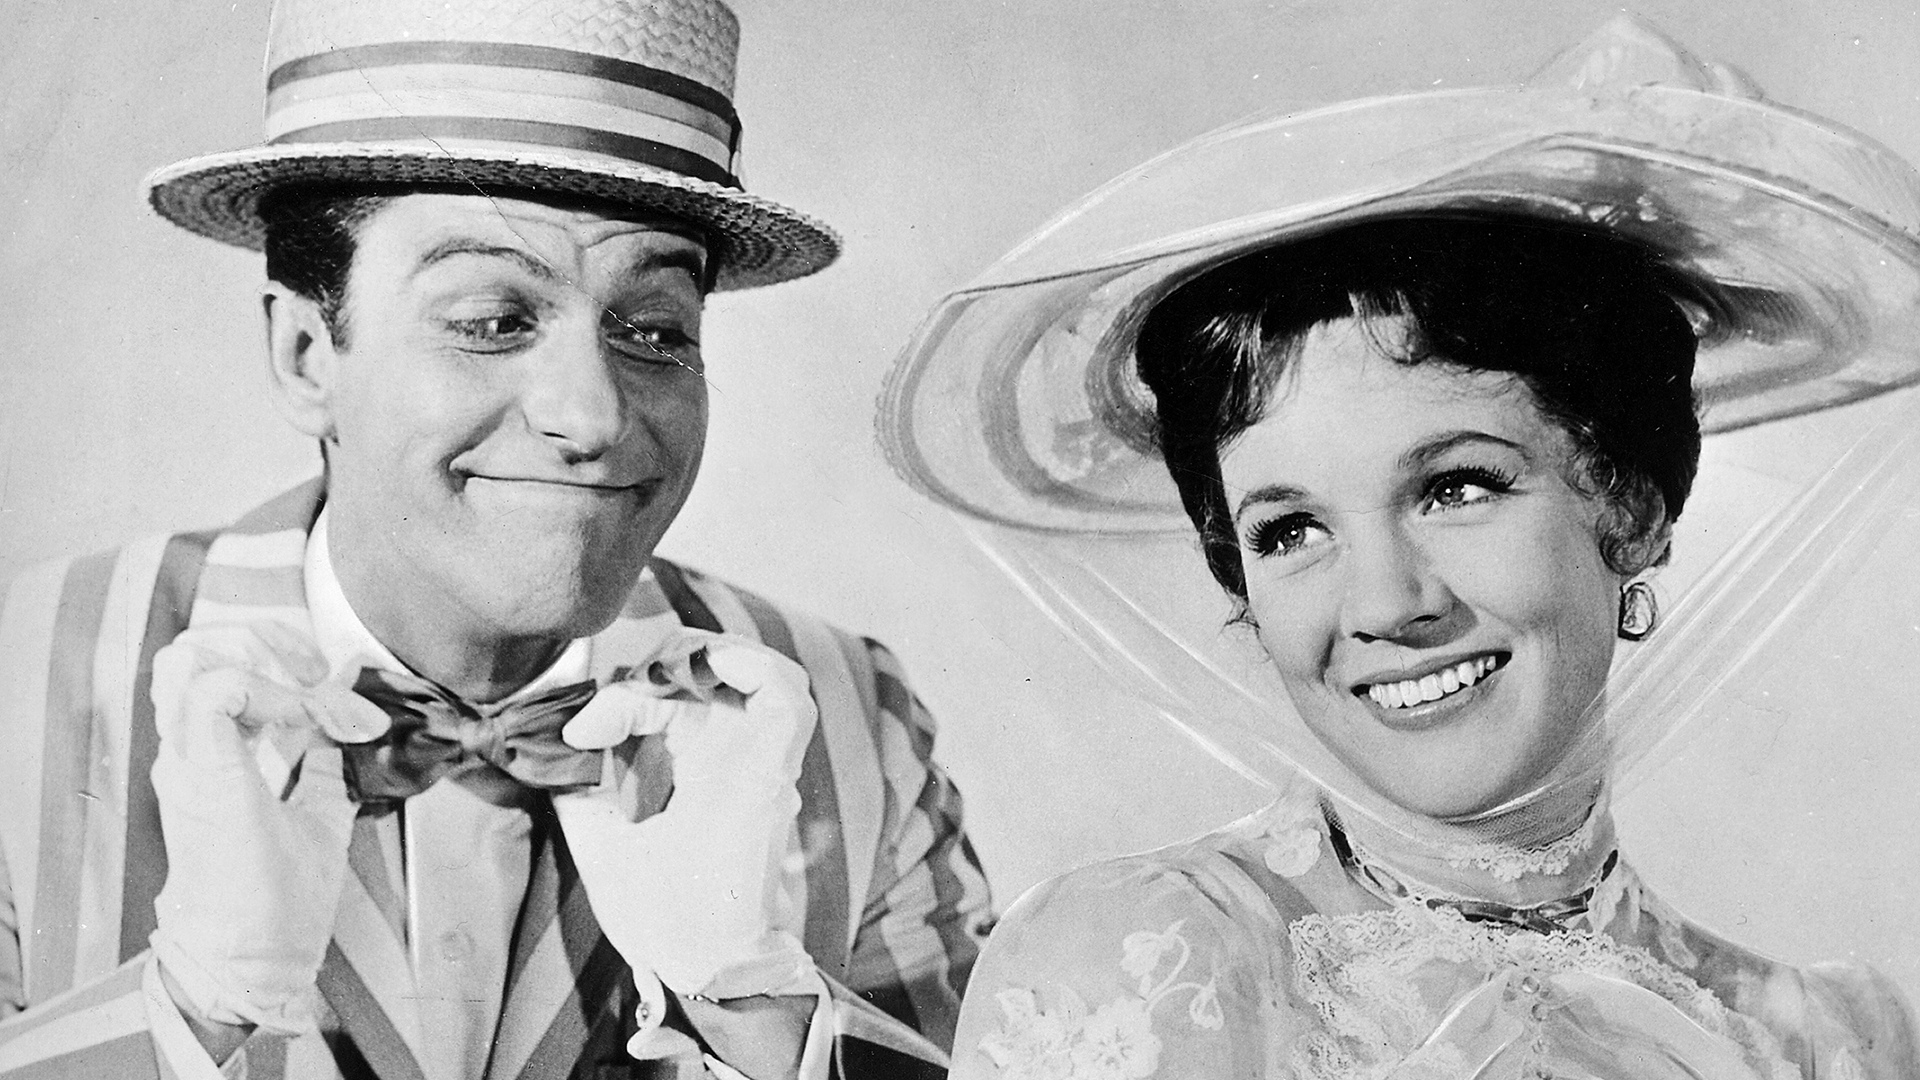 August 29, 1964: Disney’s "Mary Poppins" Debuted in New York City